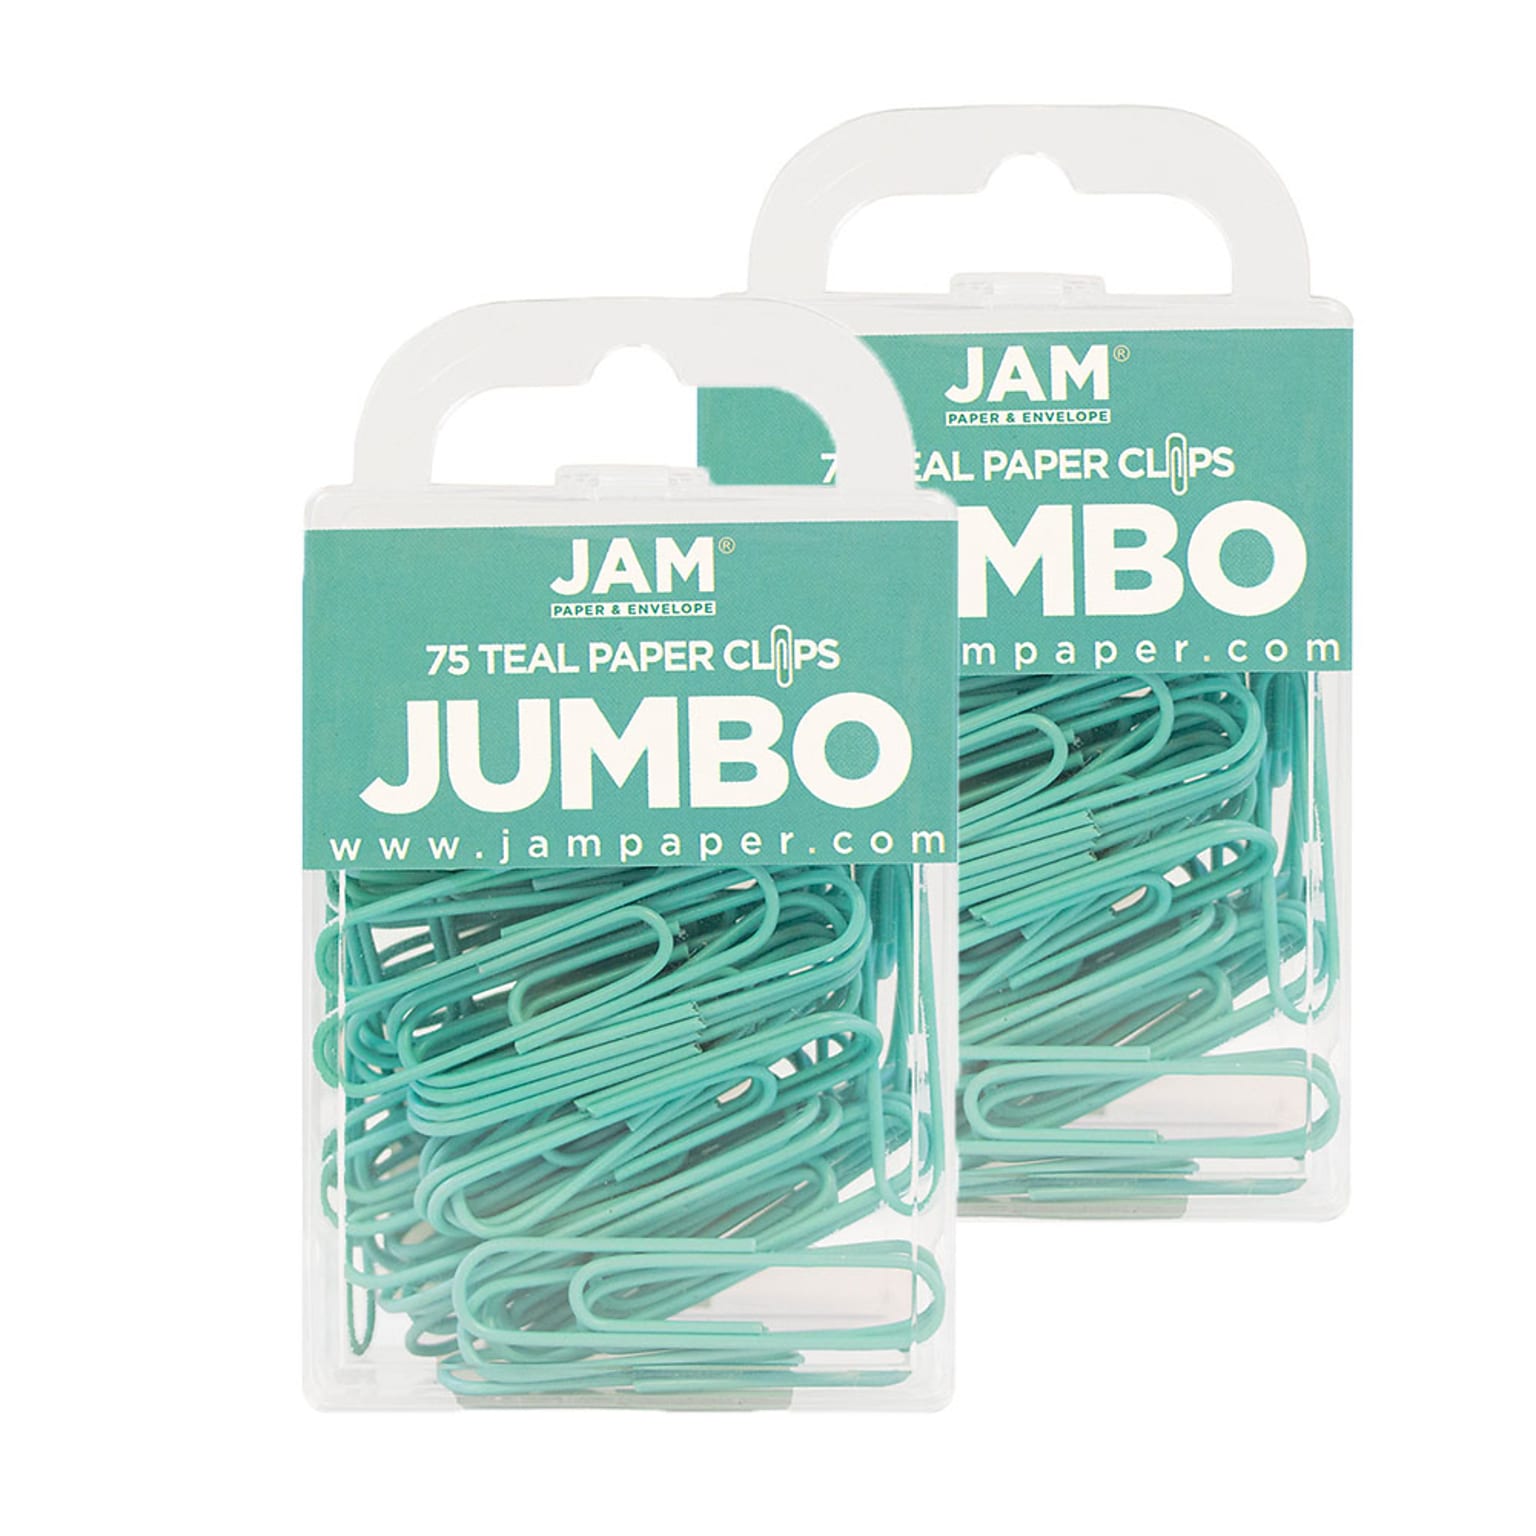 JAM Paper® Colored Jumbo Paper Clips, Large 2 Inch, Teal Paperclips, 2 Packs of 75 (21832065a)